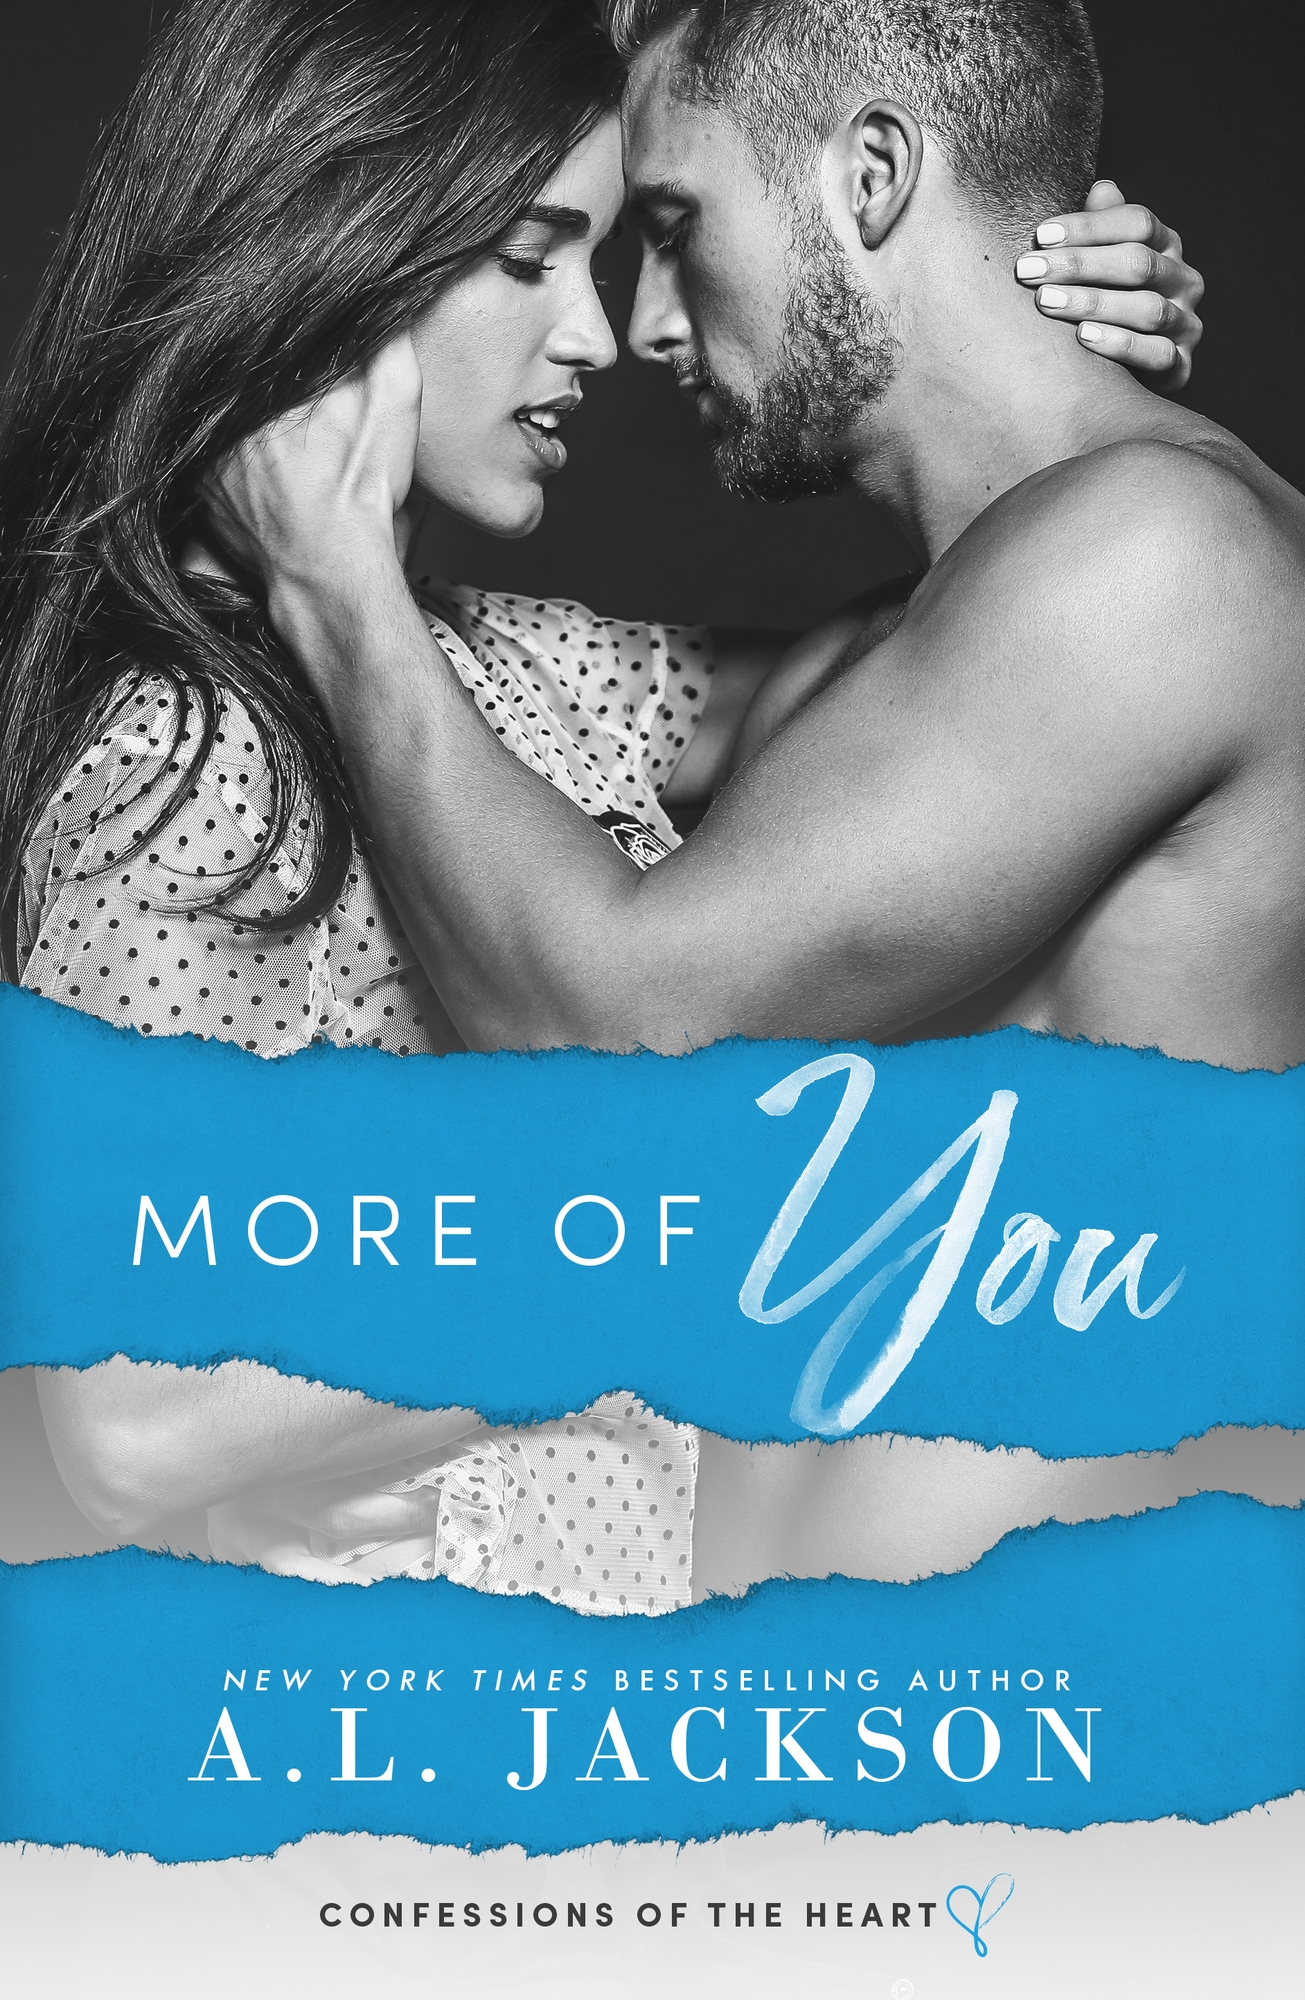 More of You by A. L. Jackson [Release Blitz]